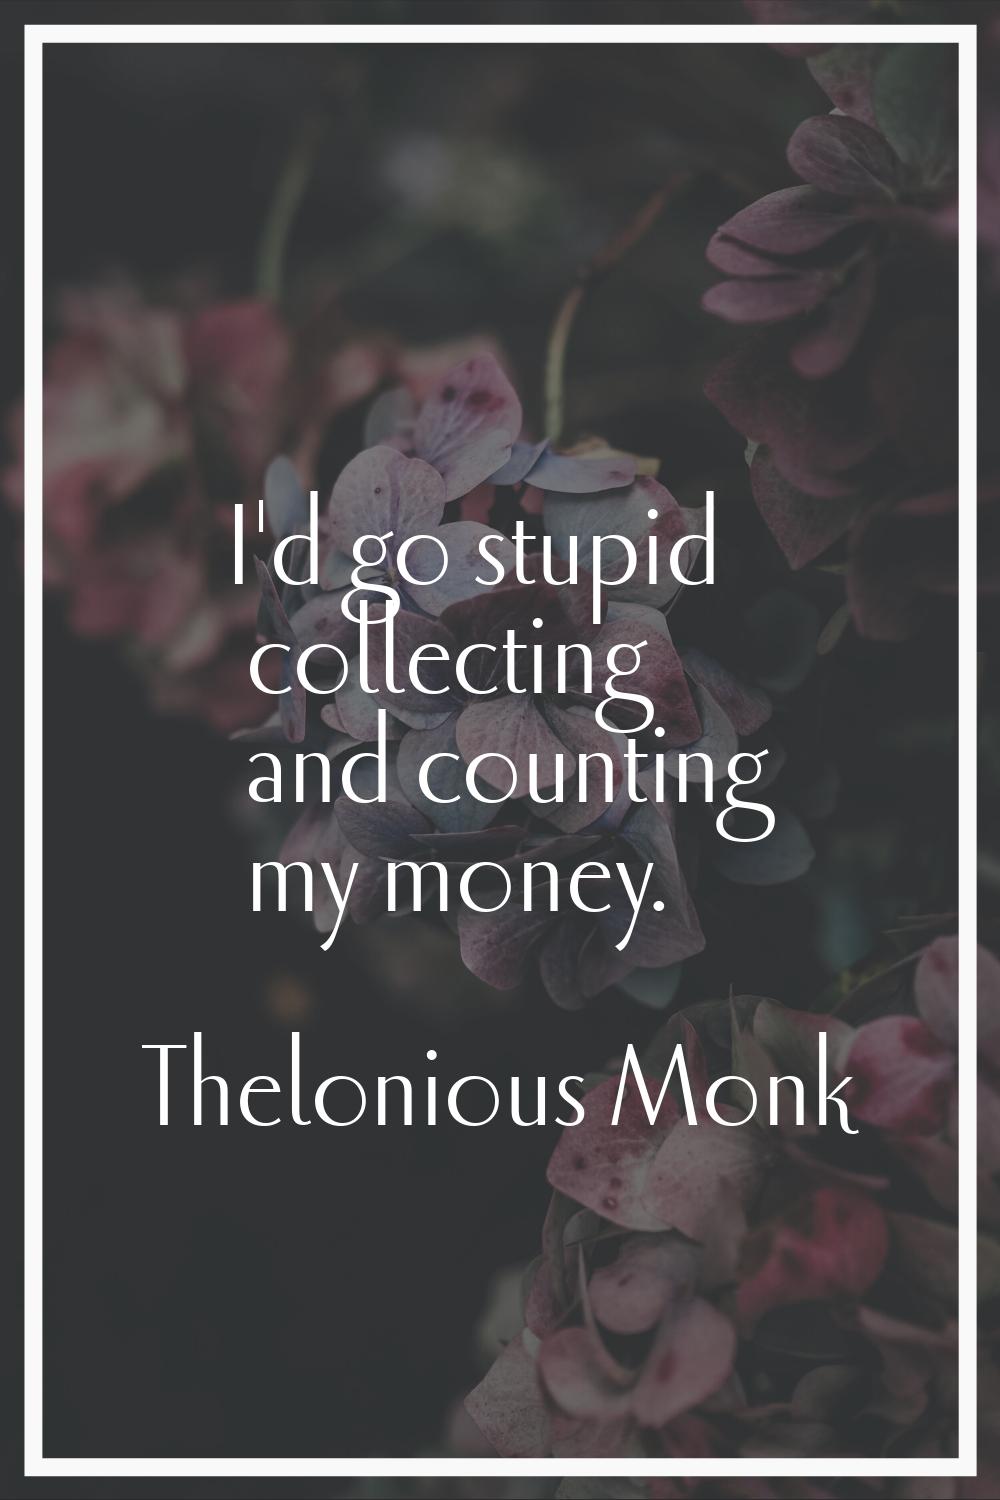 I'd go stupid collecting and counting my money.